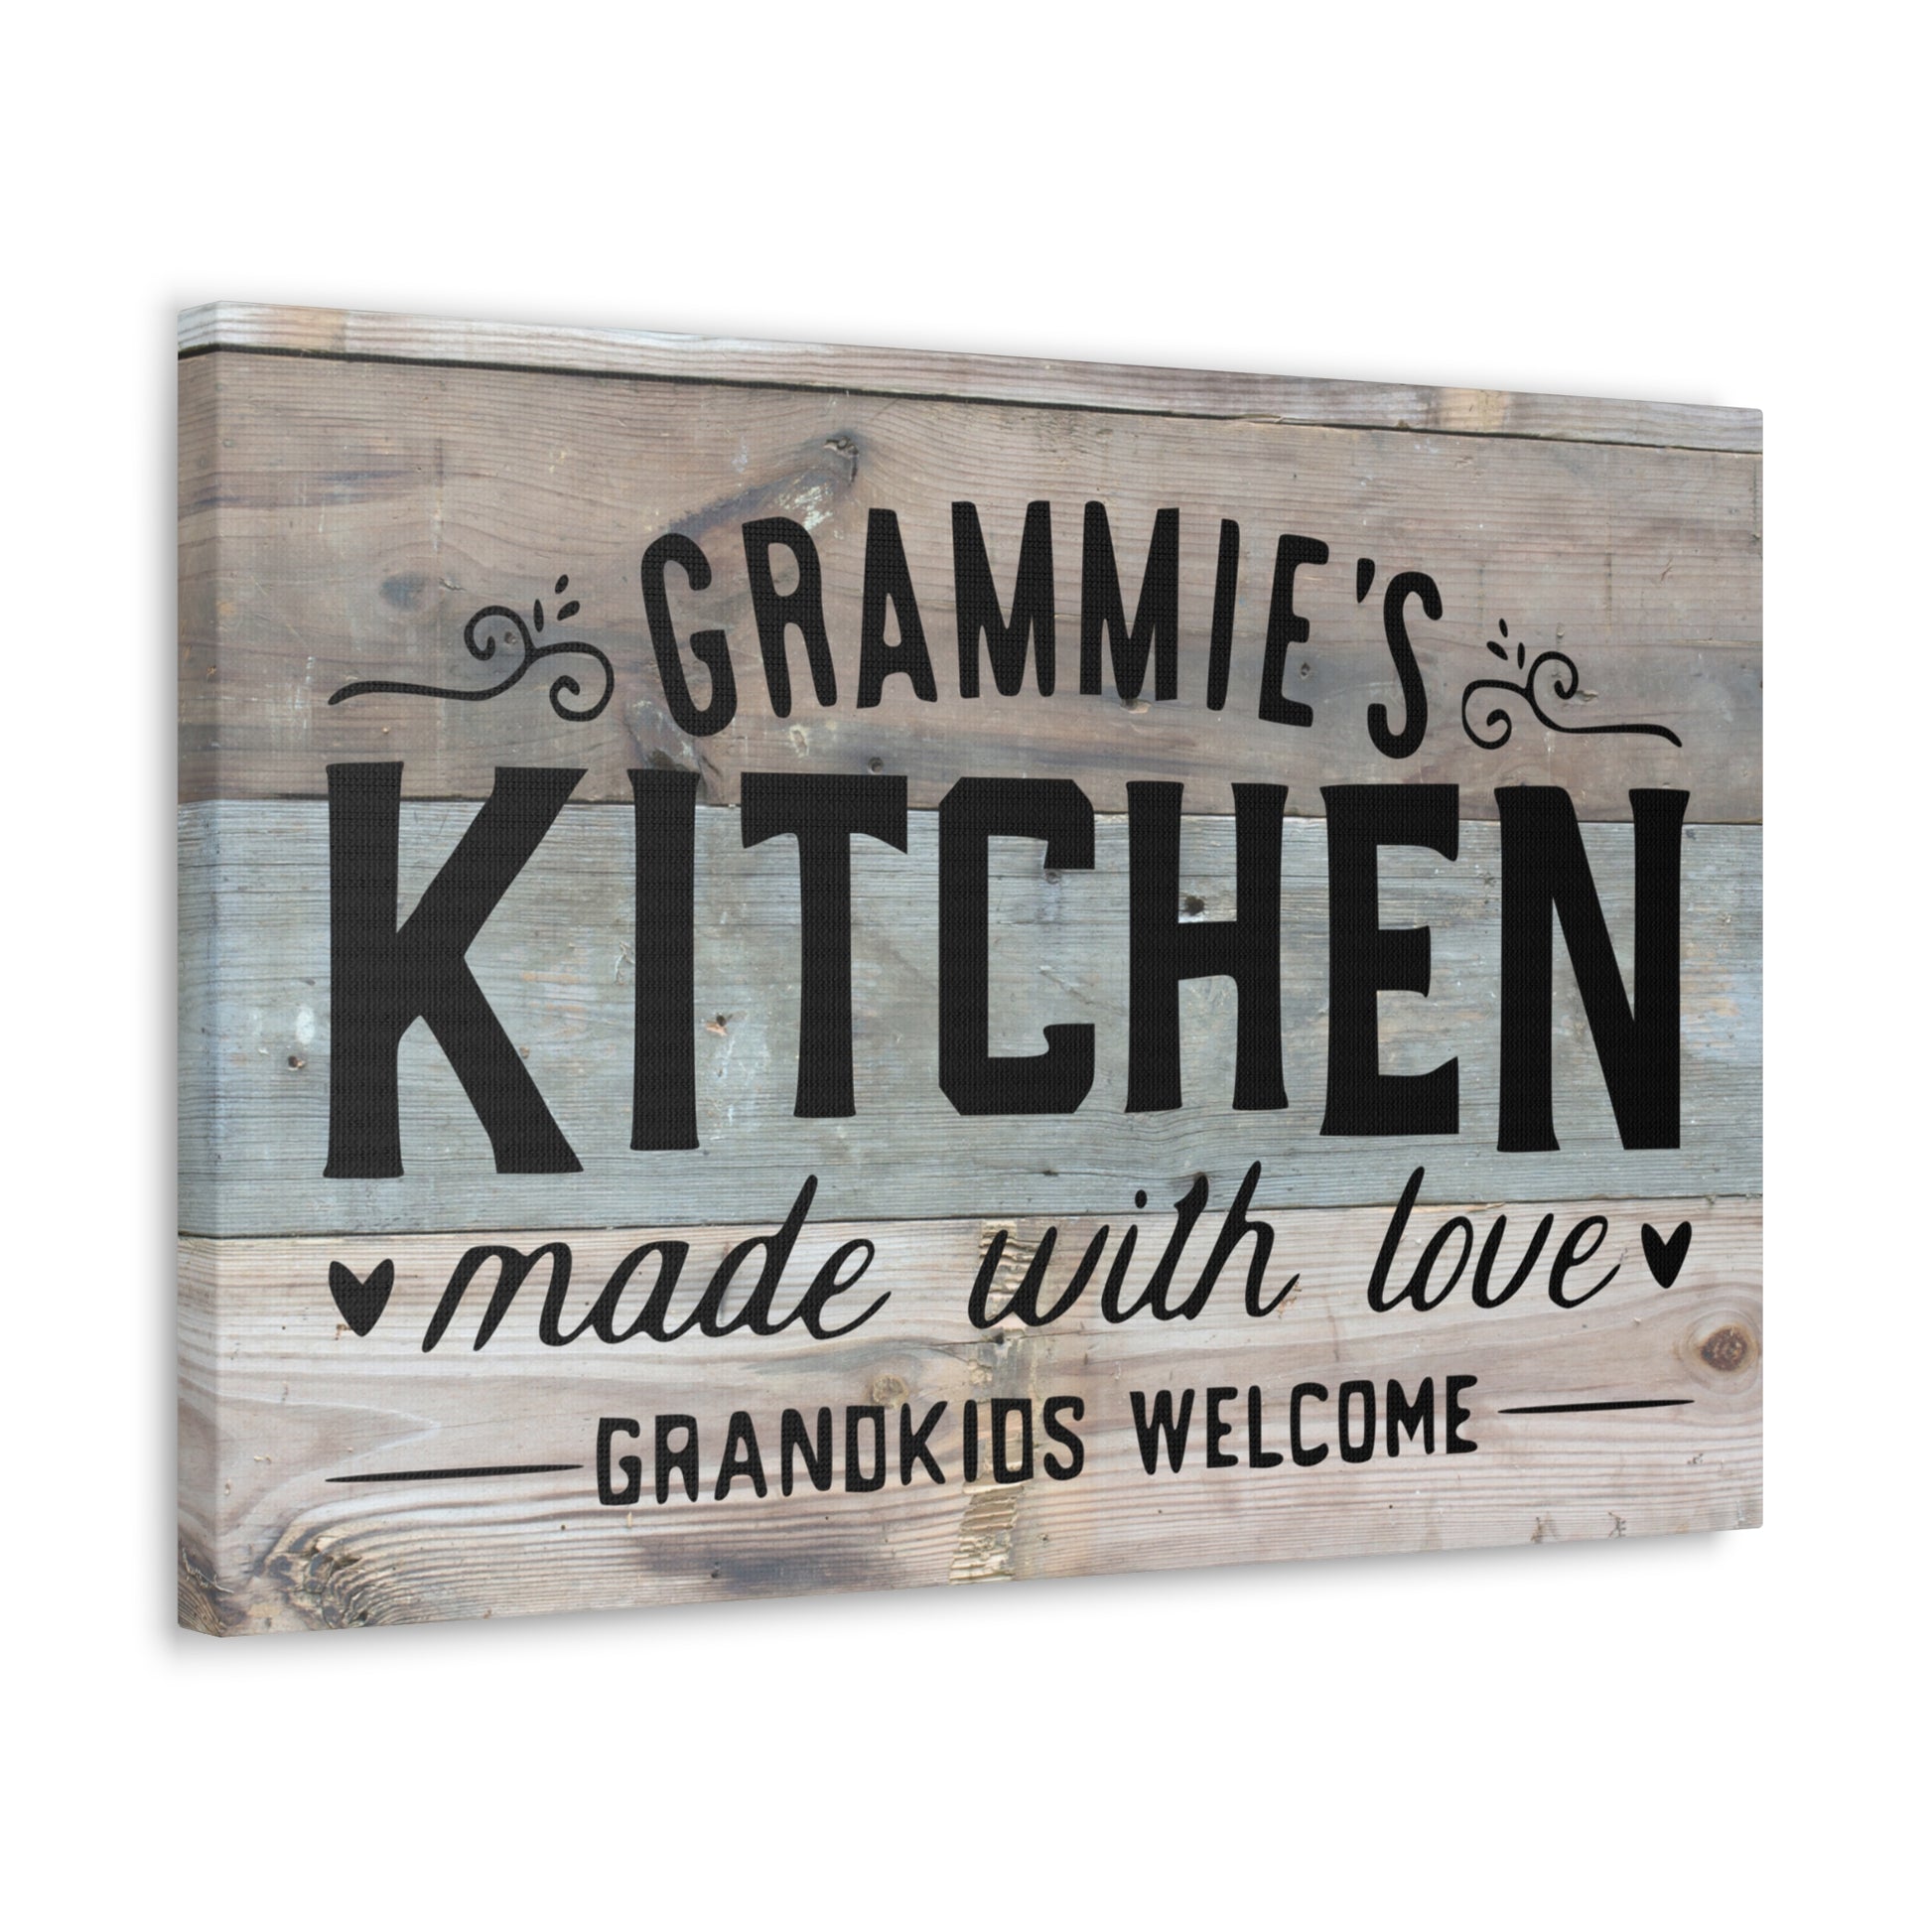 "Patented support face Grammie’s kitchen wall art"